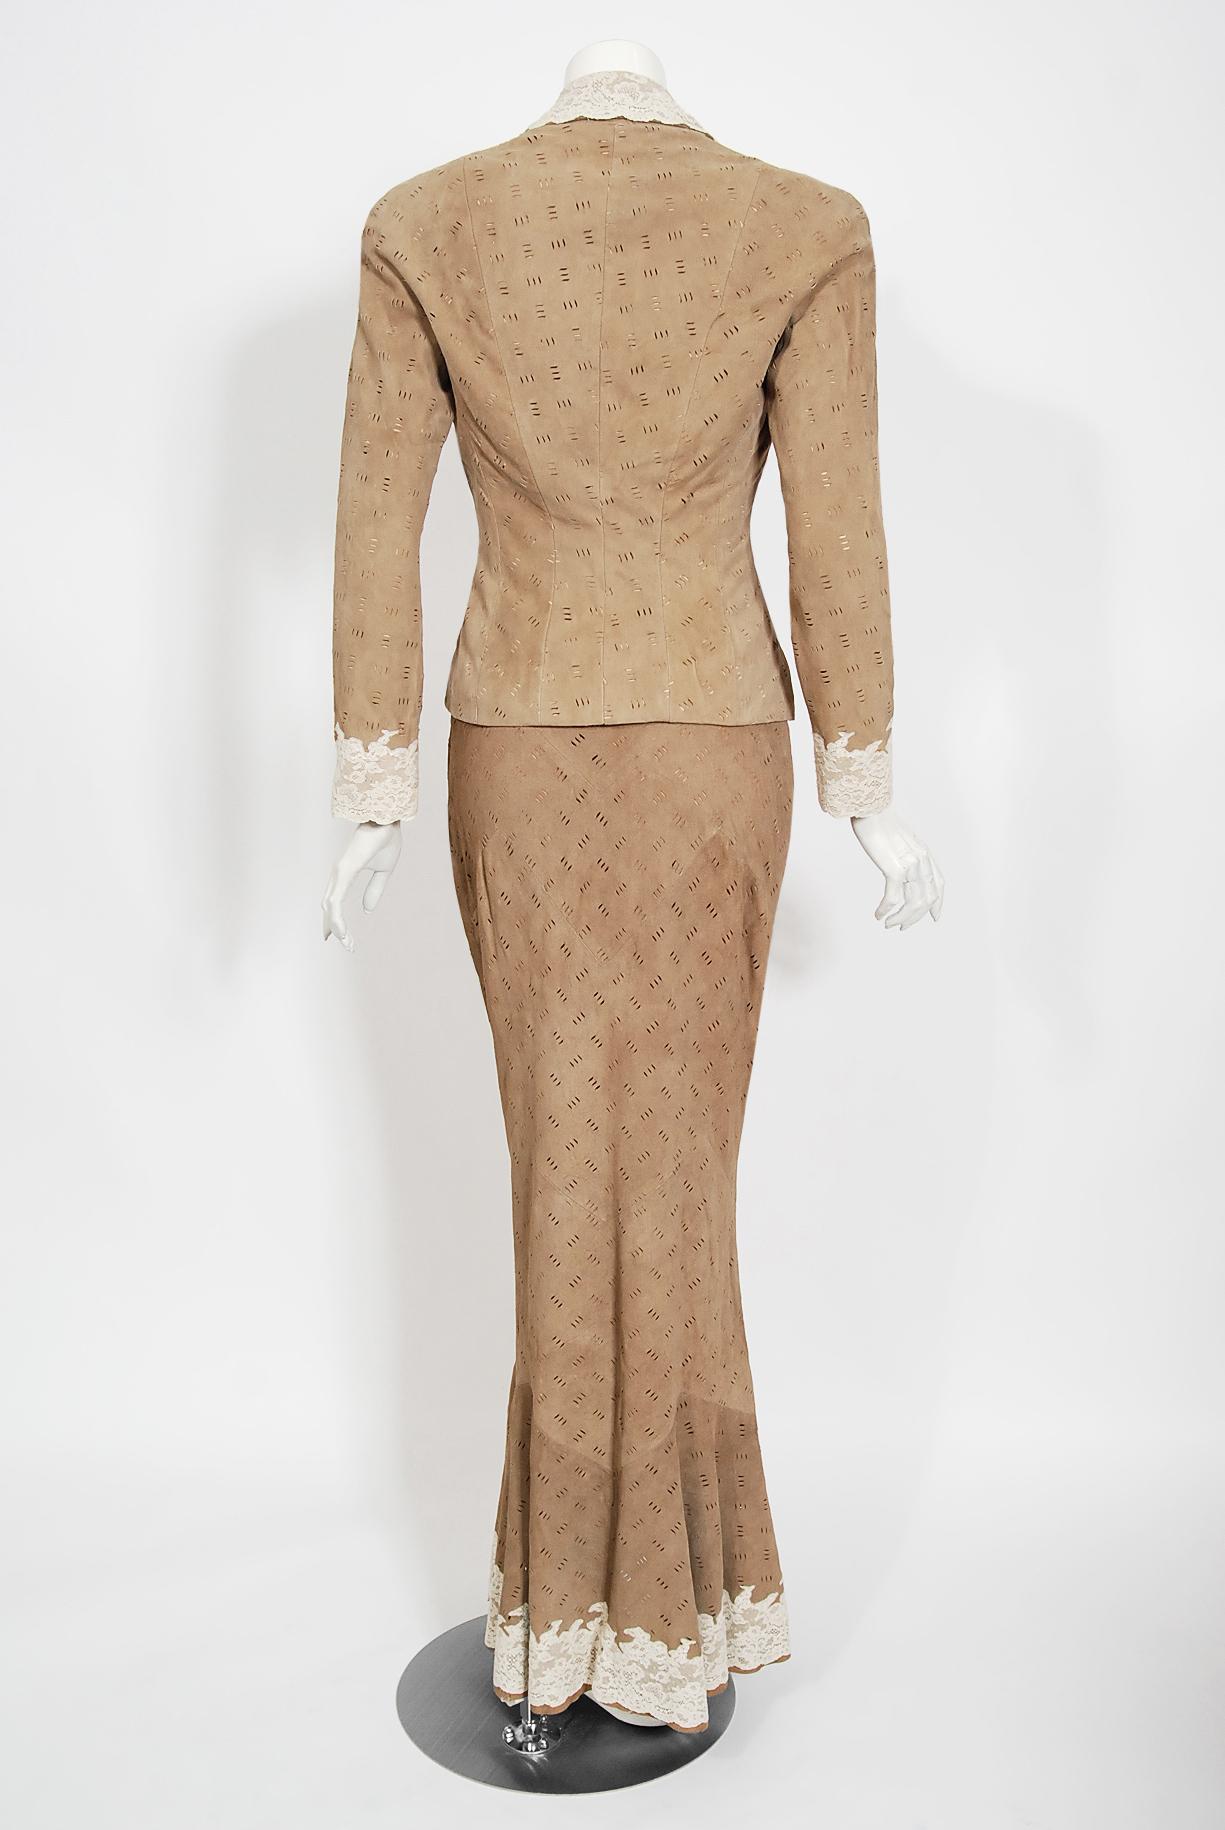 Vintage 1999 Christian Dior by Galliano Suede Lace Bias-Cut Slip Gown and Jacket For Sale 9